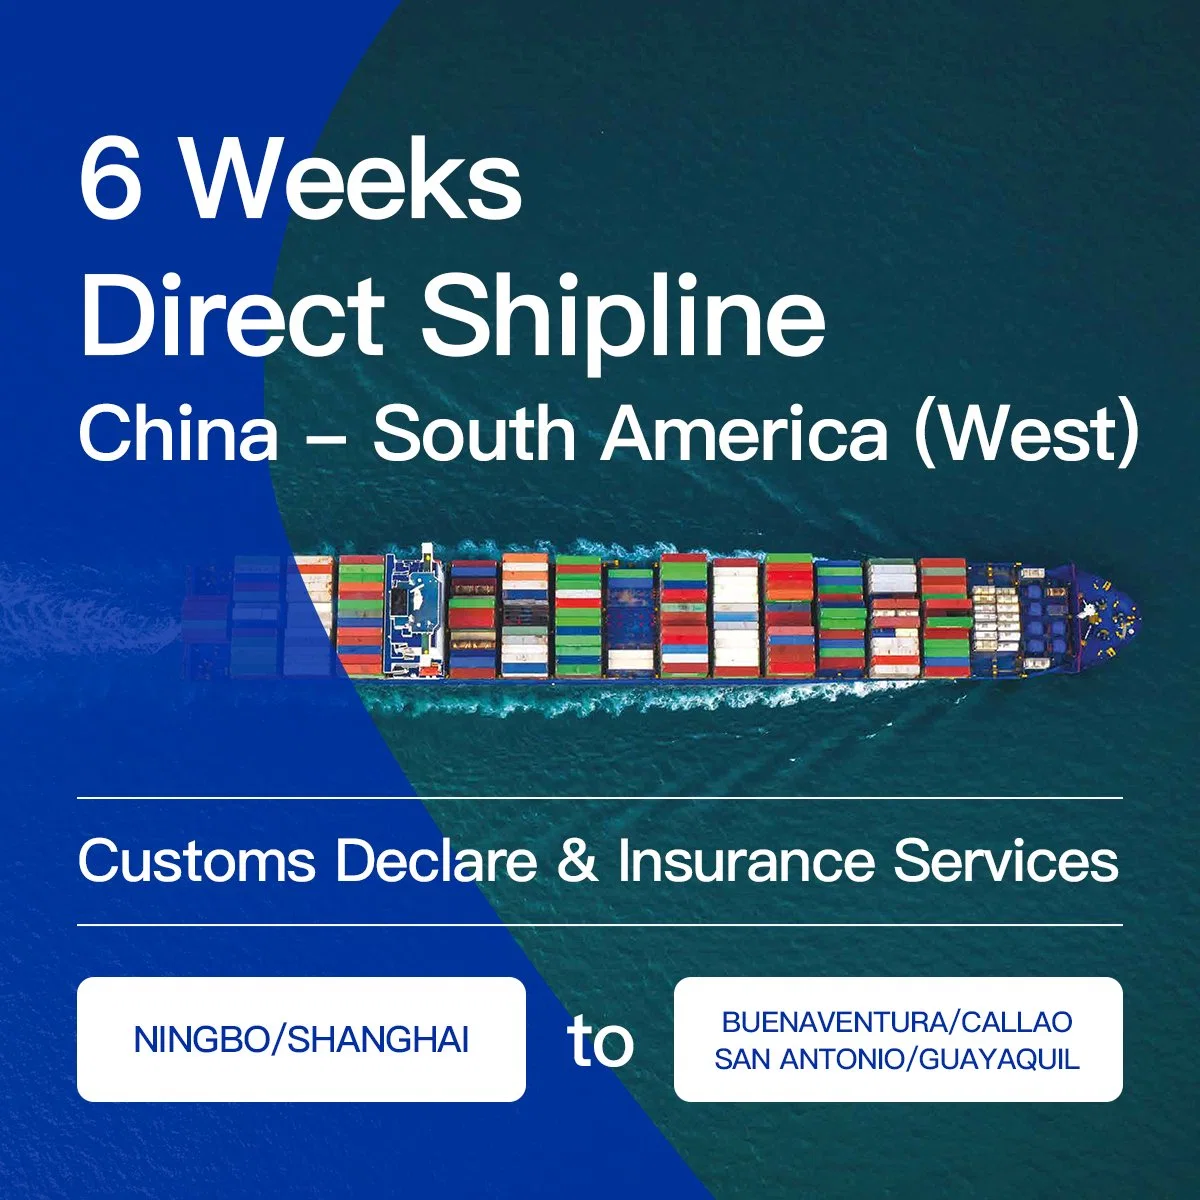 Full Container Load Sea Shipping Service, From China to Mexico